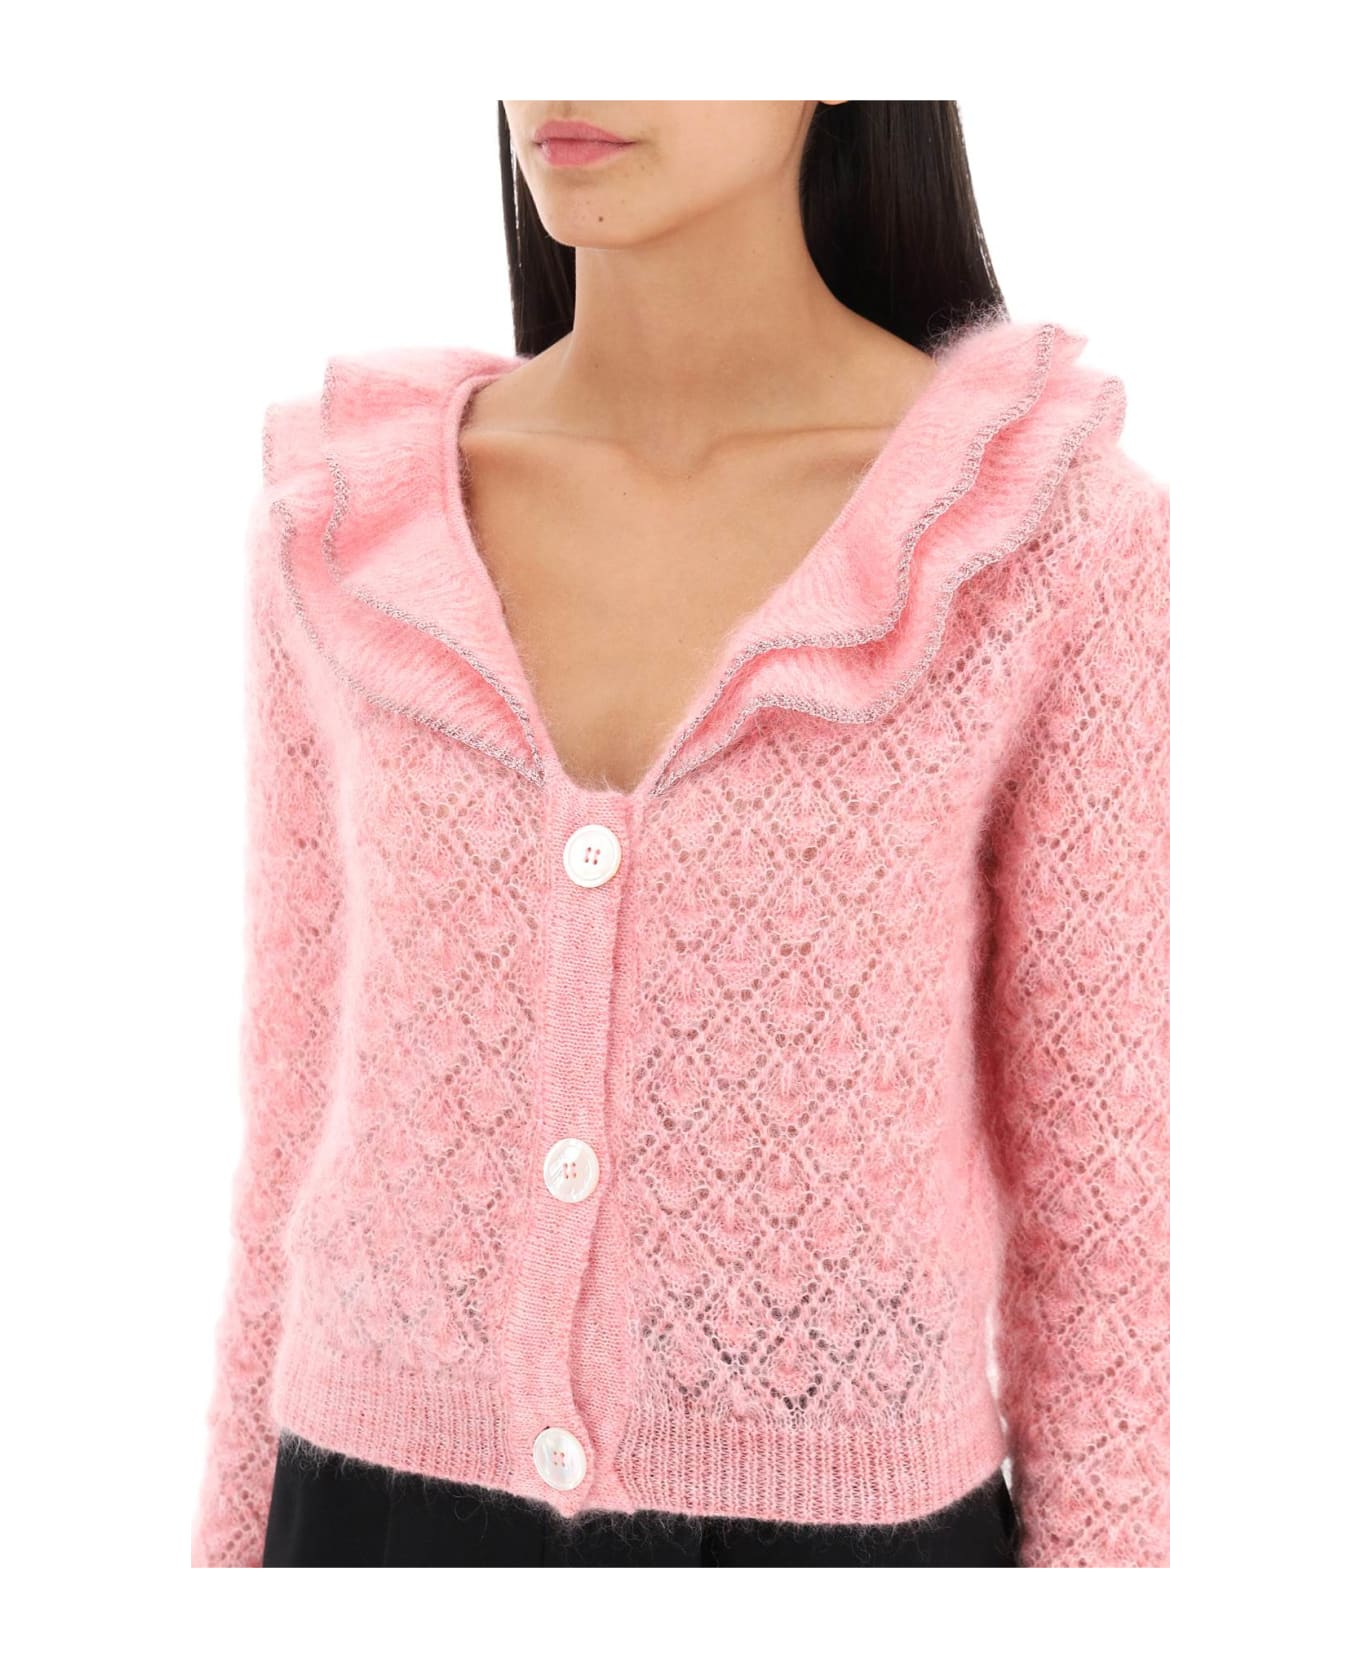 Alessandra Rich Cropped Cardigan With Frills - Pink